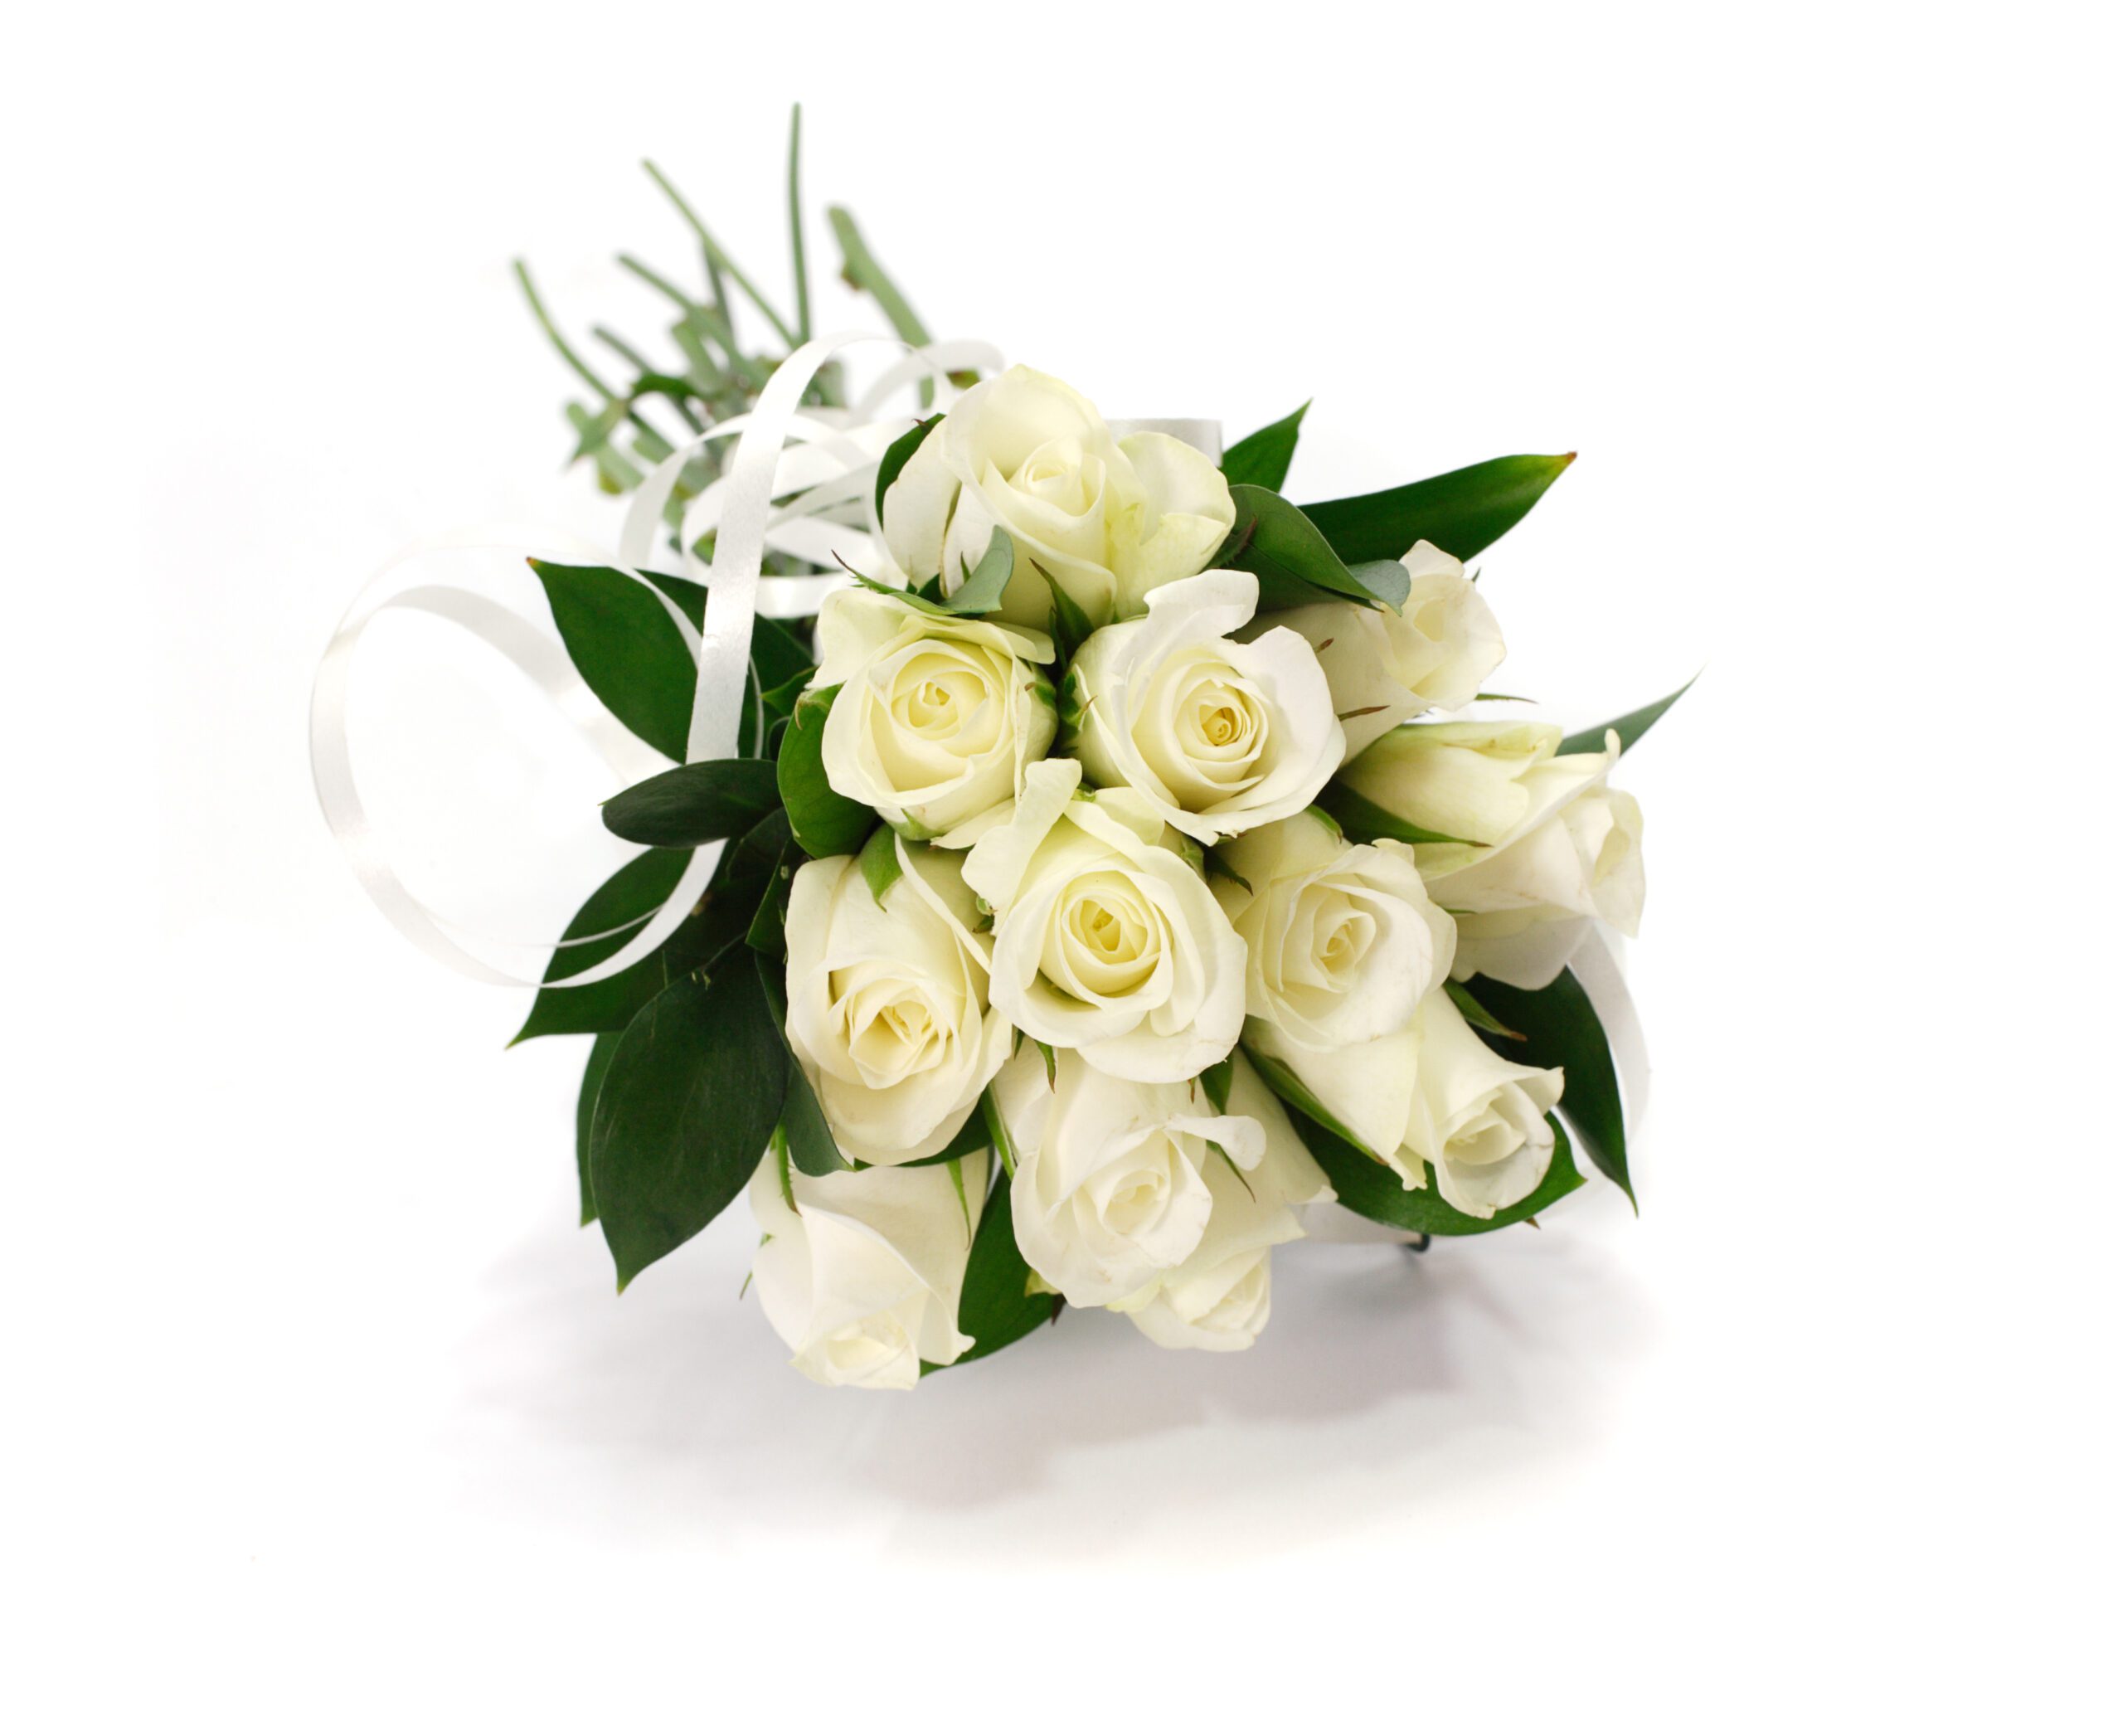 White rose flower bouquet or wedding posy on isolated background